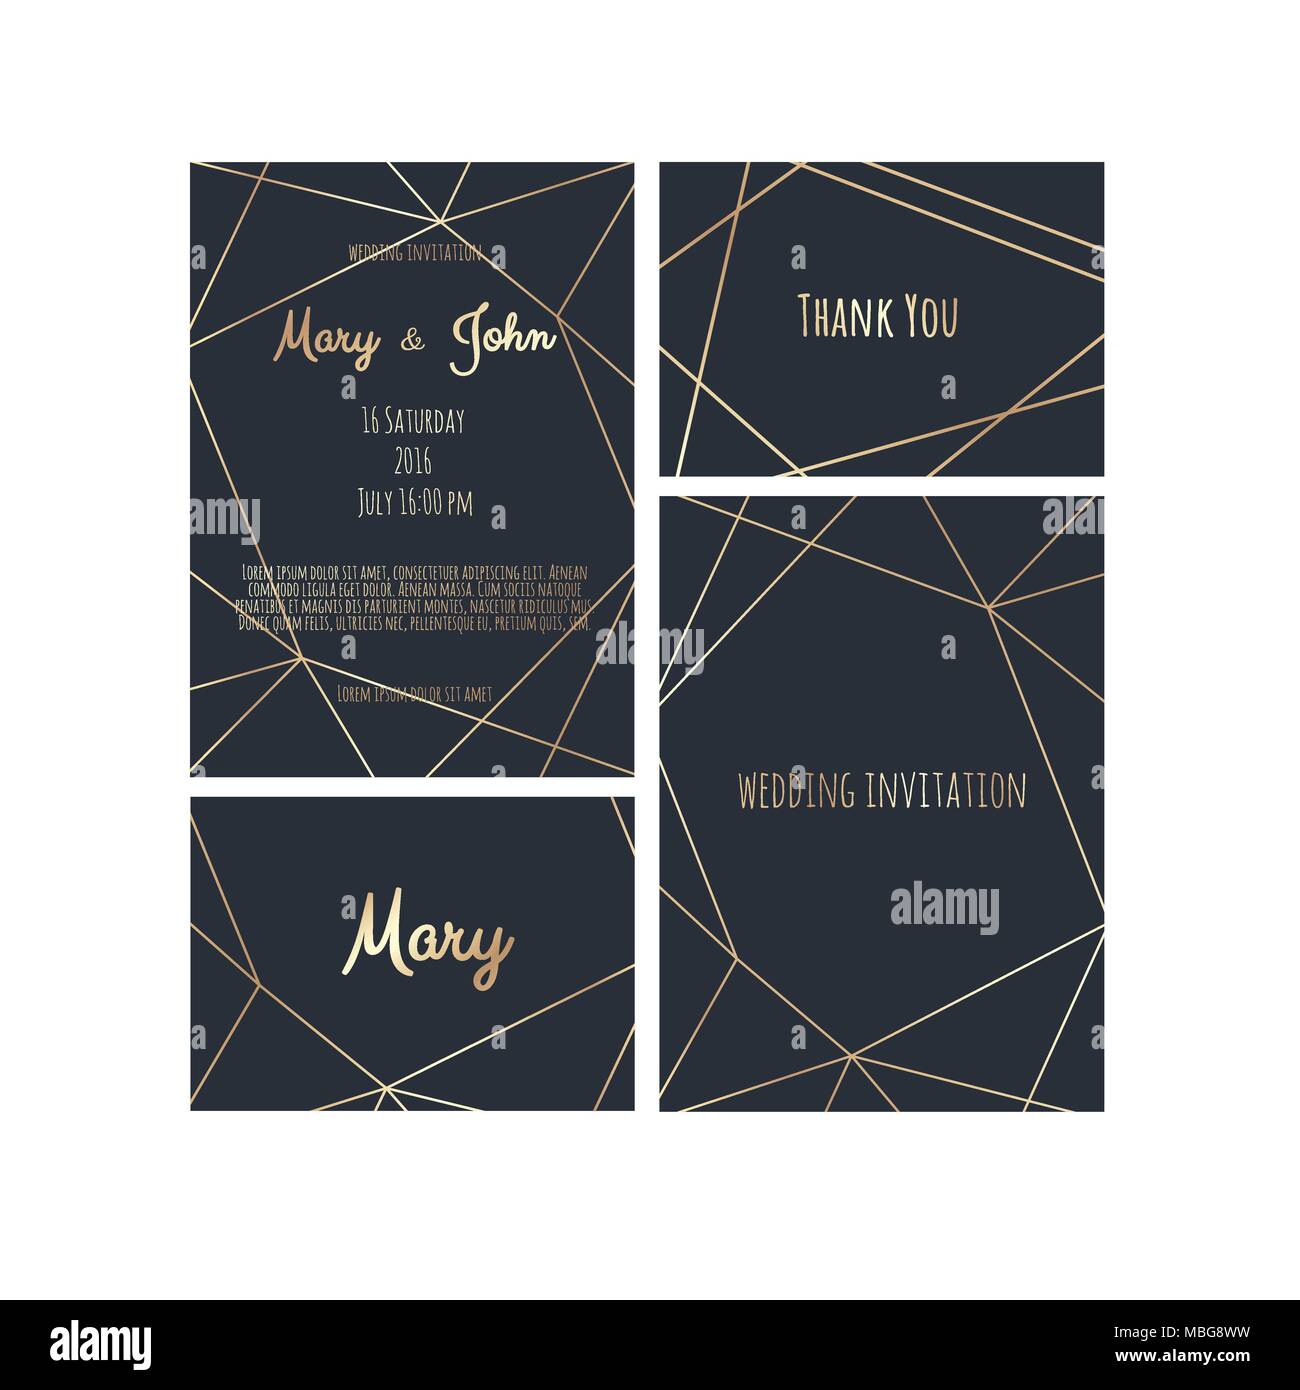 Wedding Invitation, invite card design with Geometrical art lines, gold foil border, frame. Vector modern geometric abstract template layout. Stock Vector